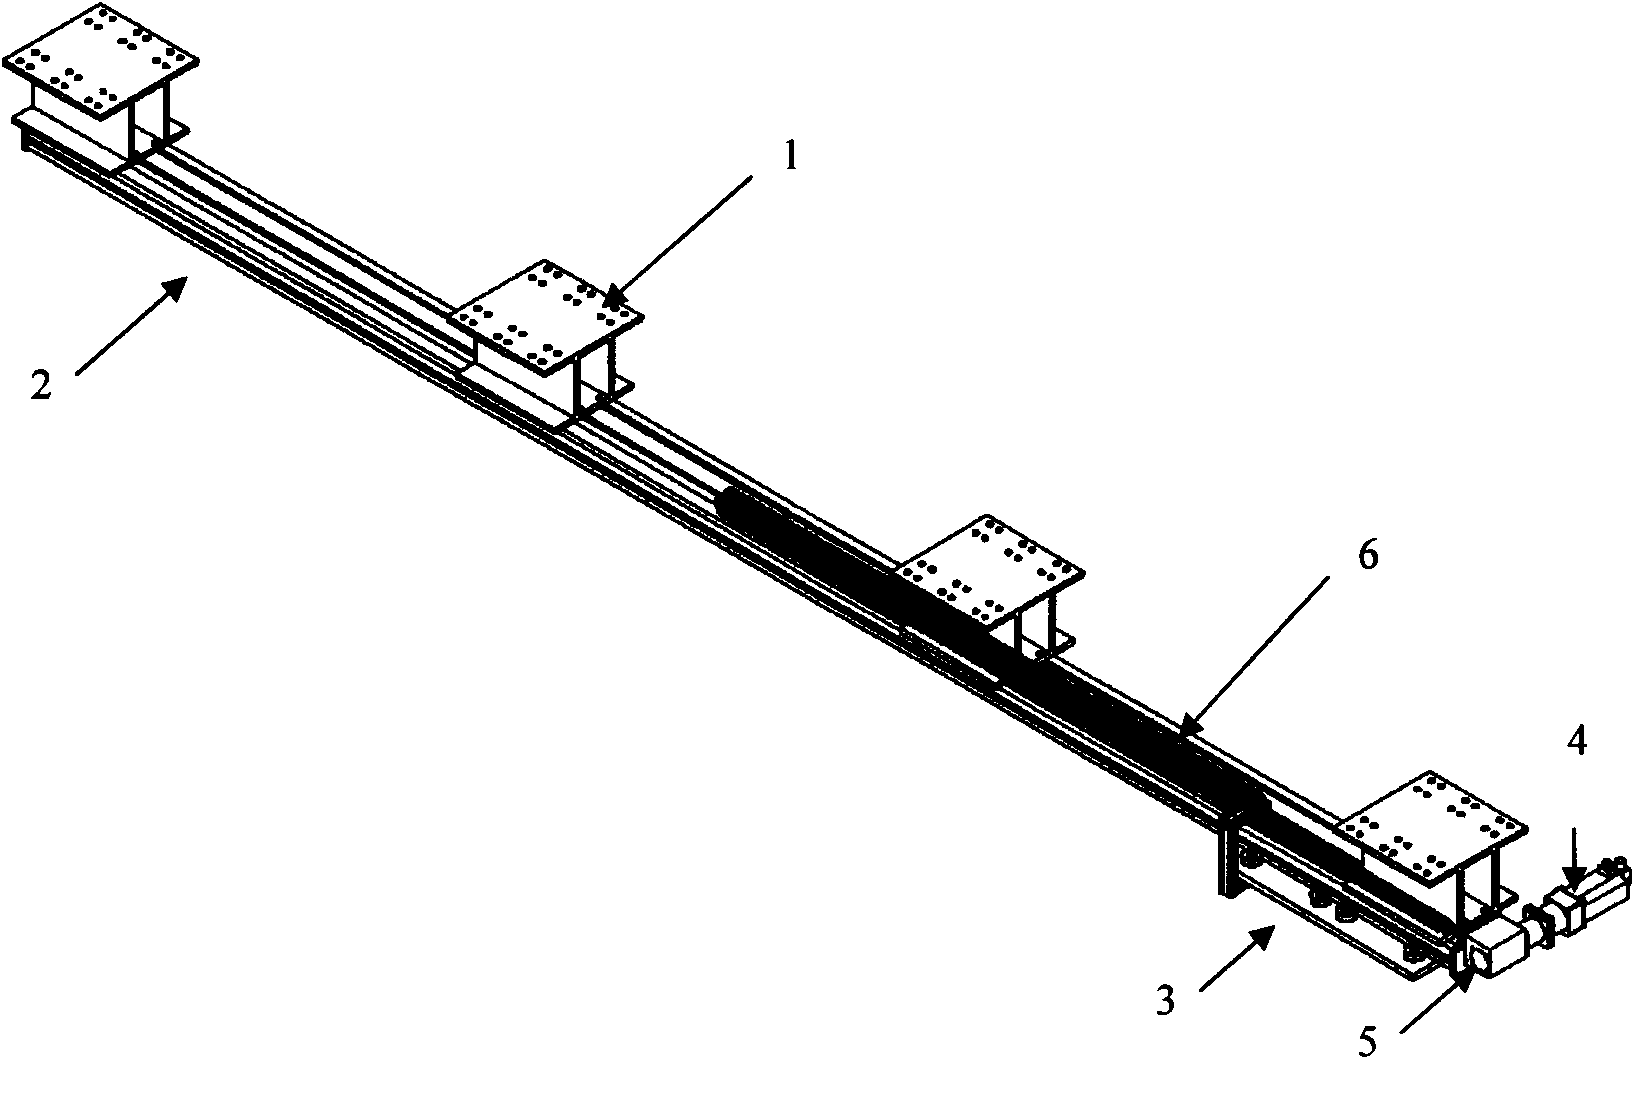 Forced reciprocating movement device of ocean structure